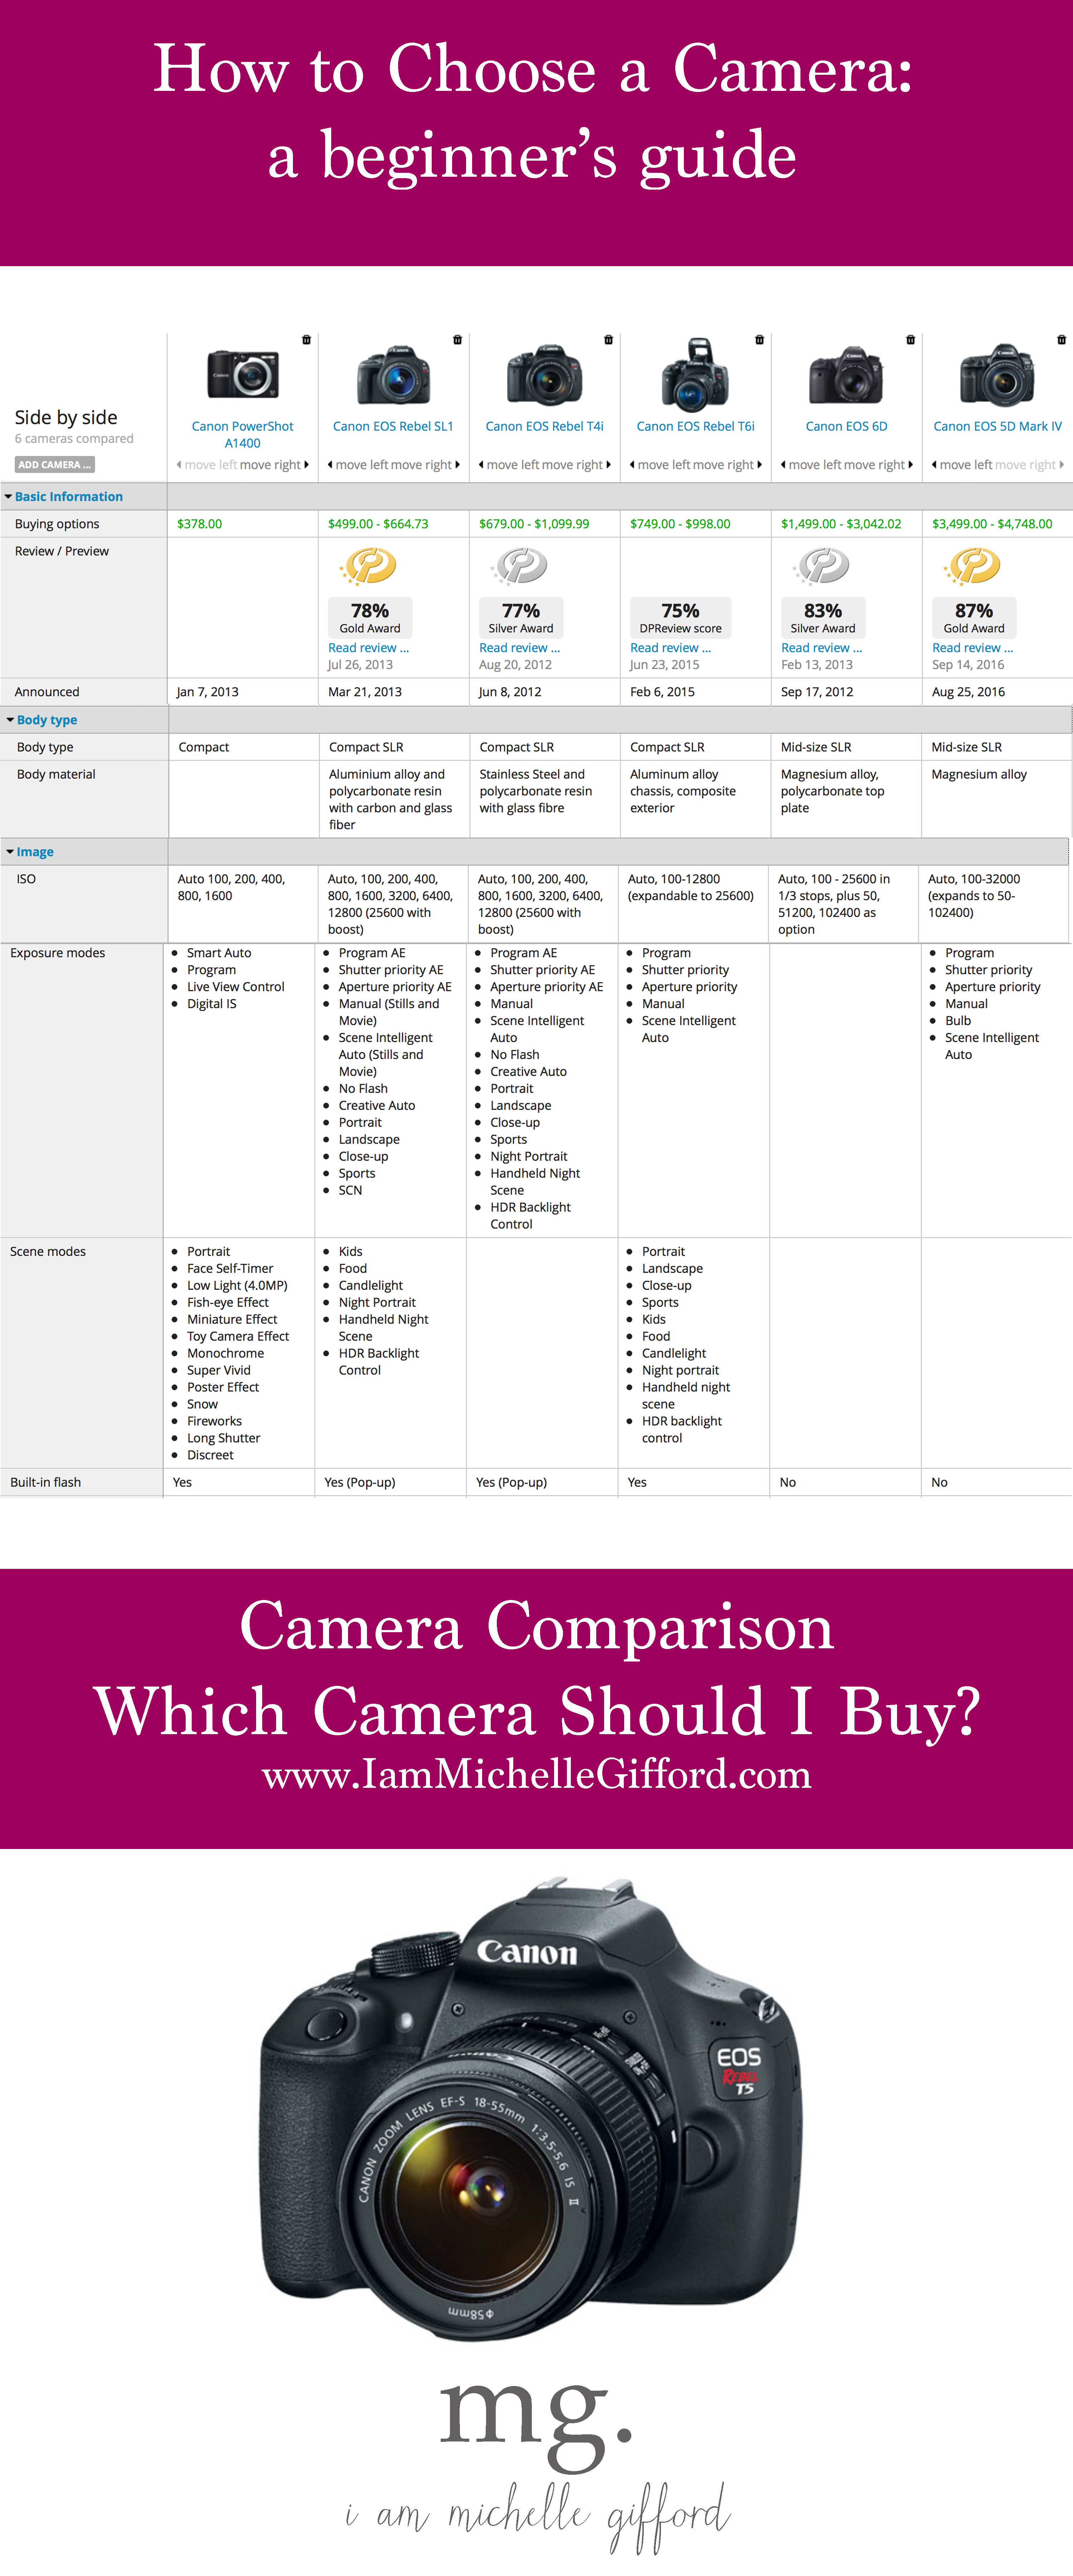 how to choose a camera camera comparison by I am Michelle Gifford